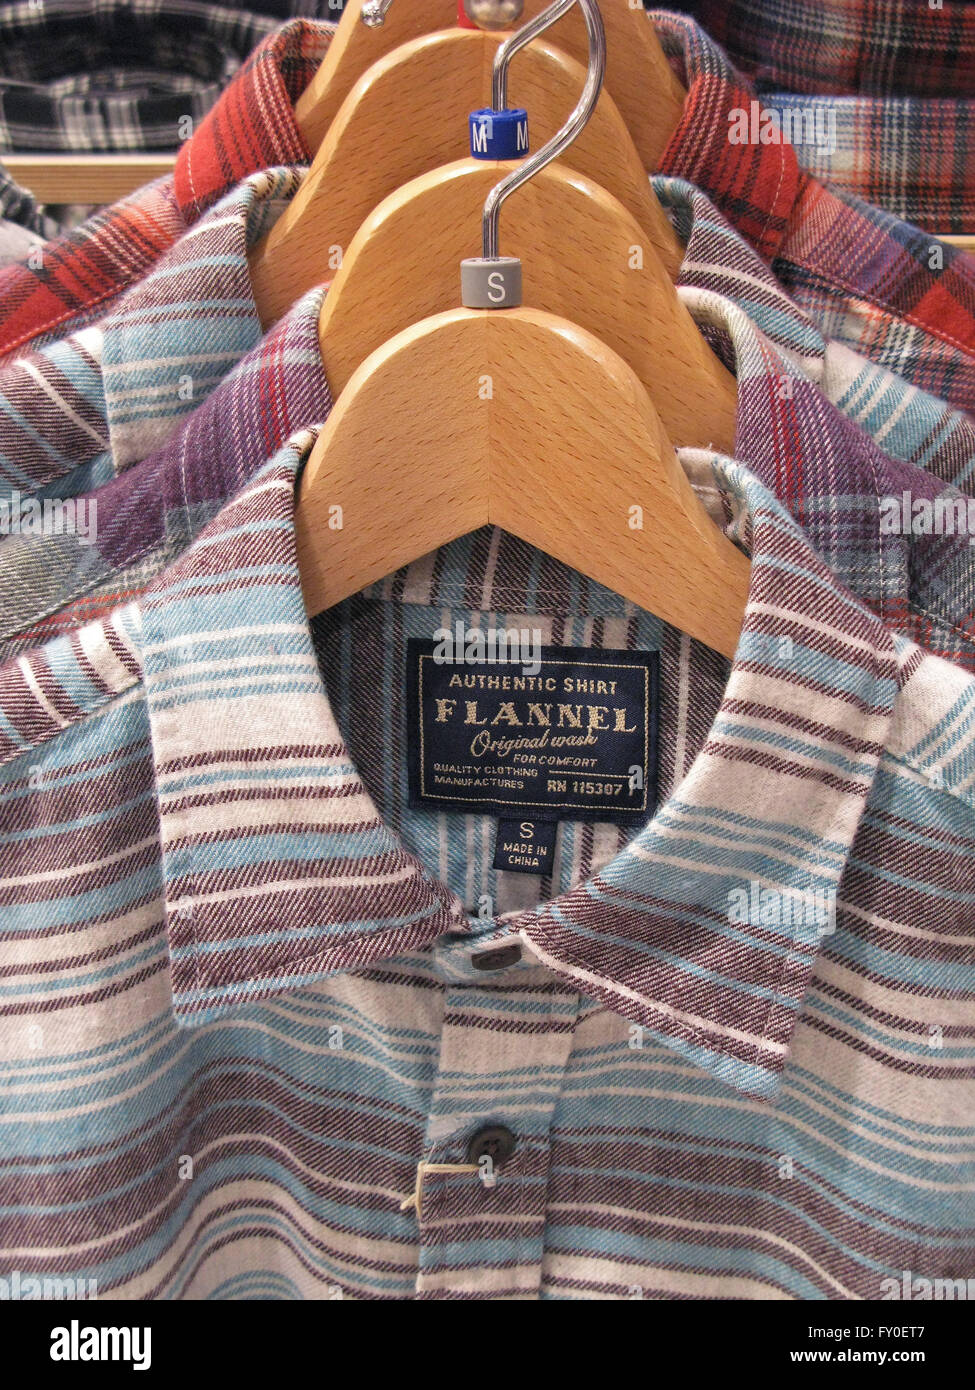 flannel shirts for sale on hangar Stock Photo